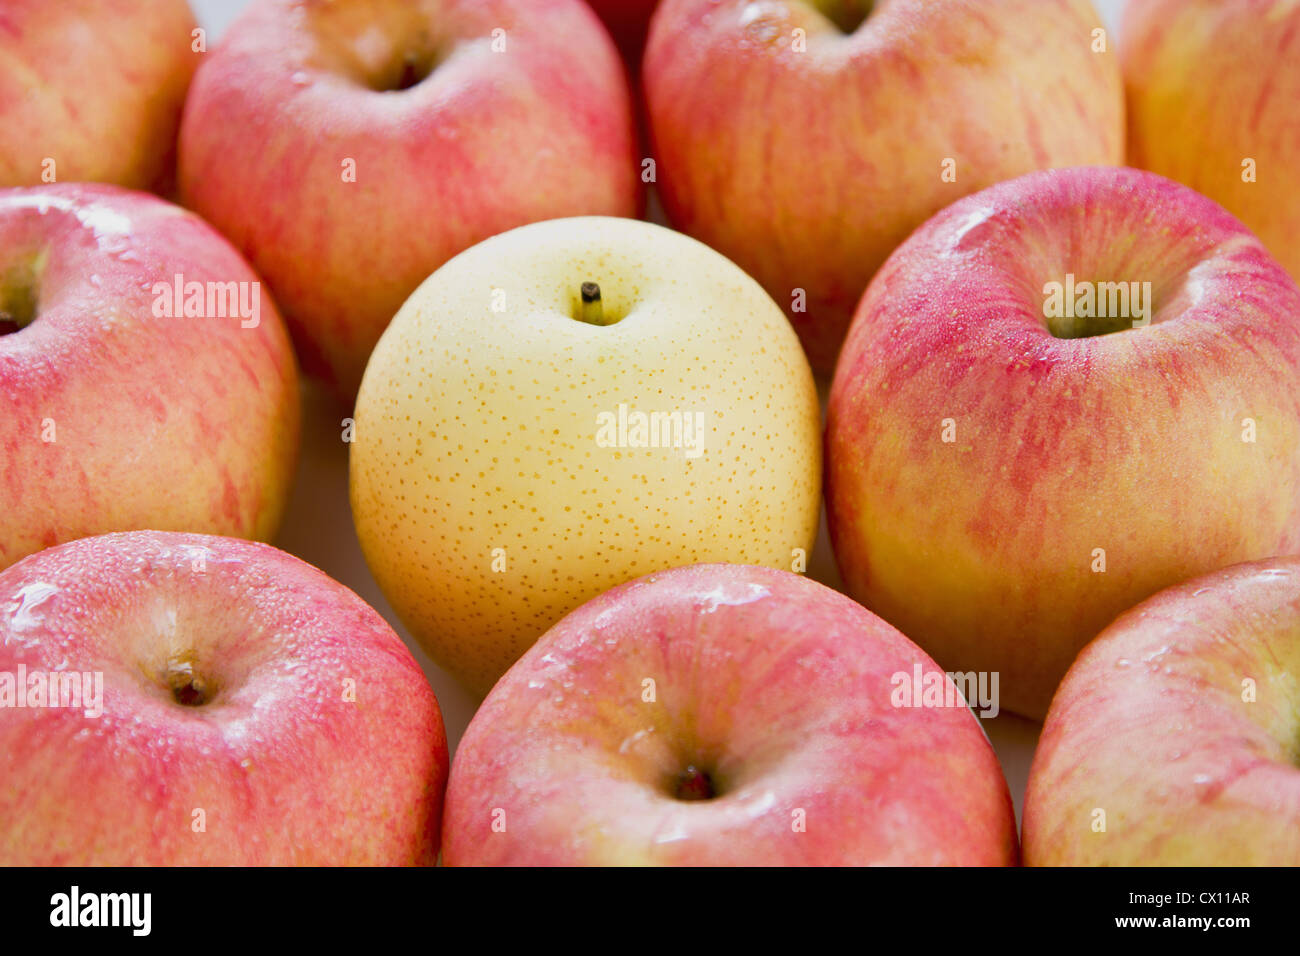 Apple and Pear Stock Photo